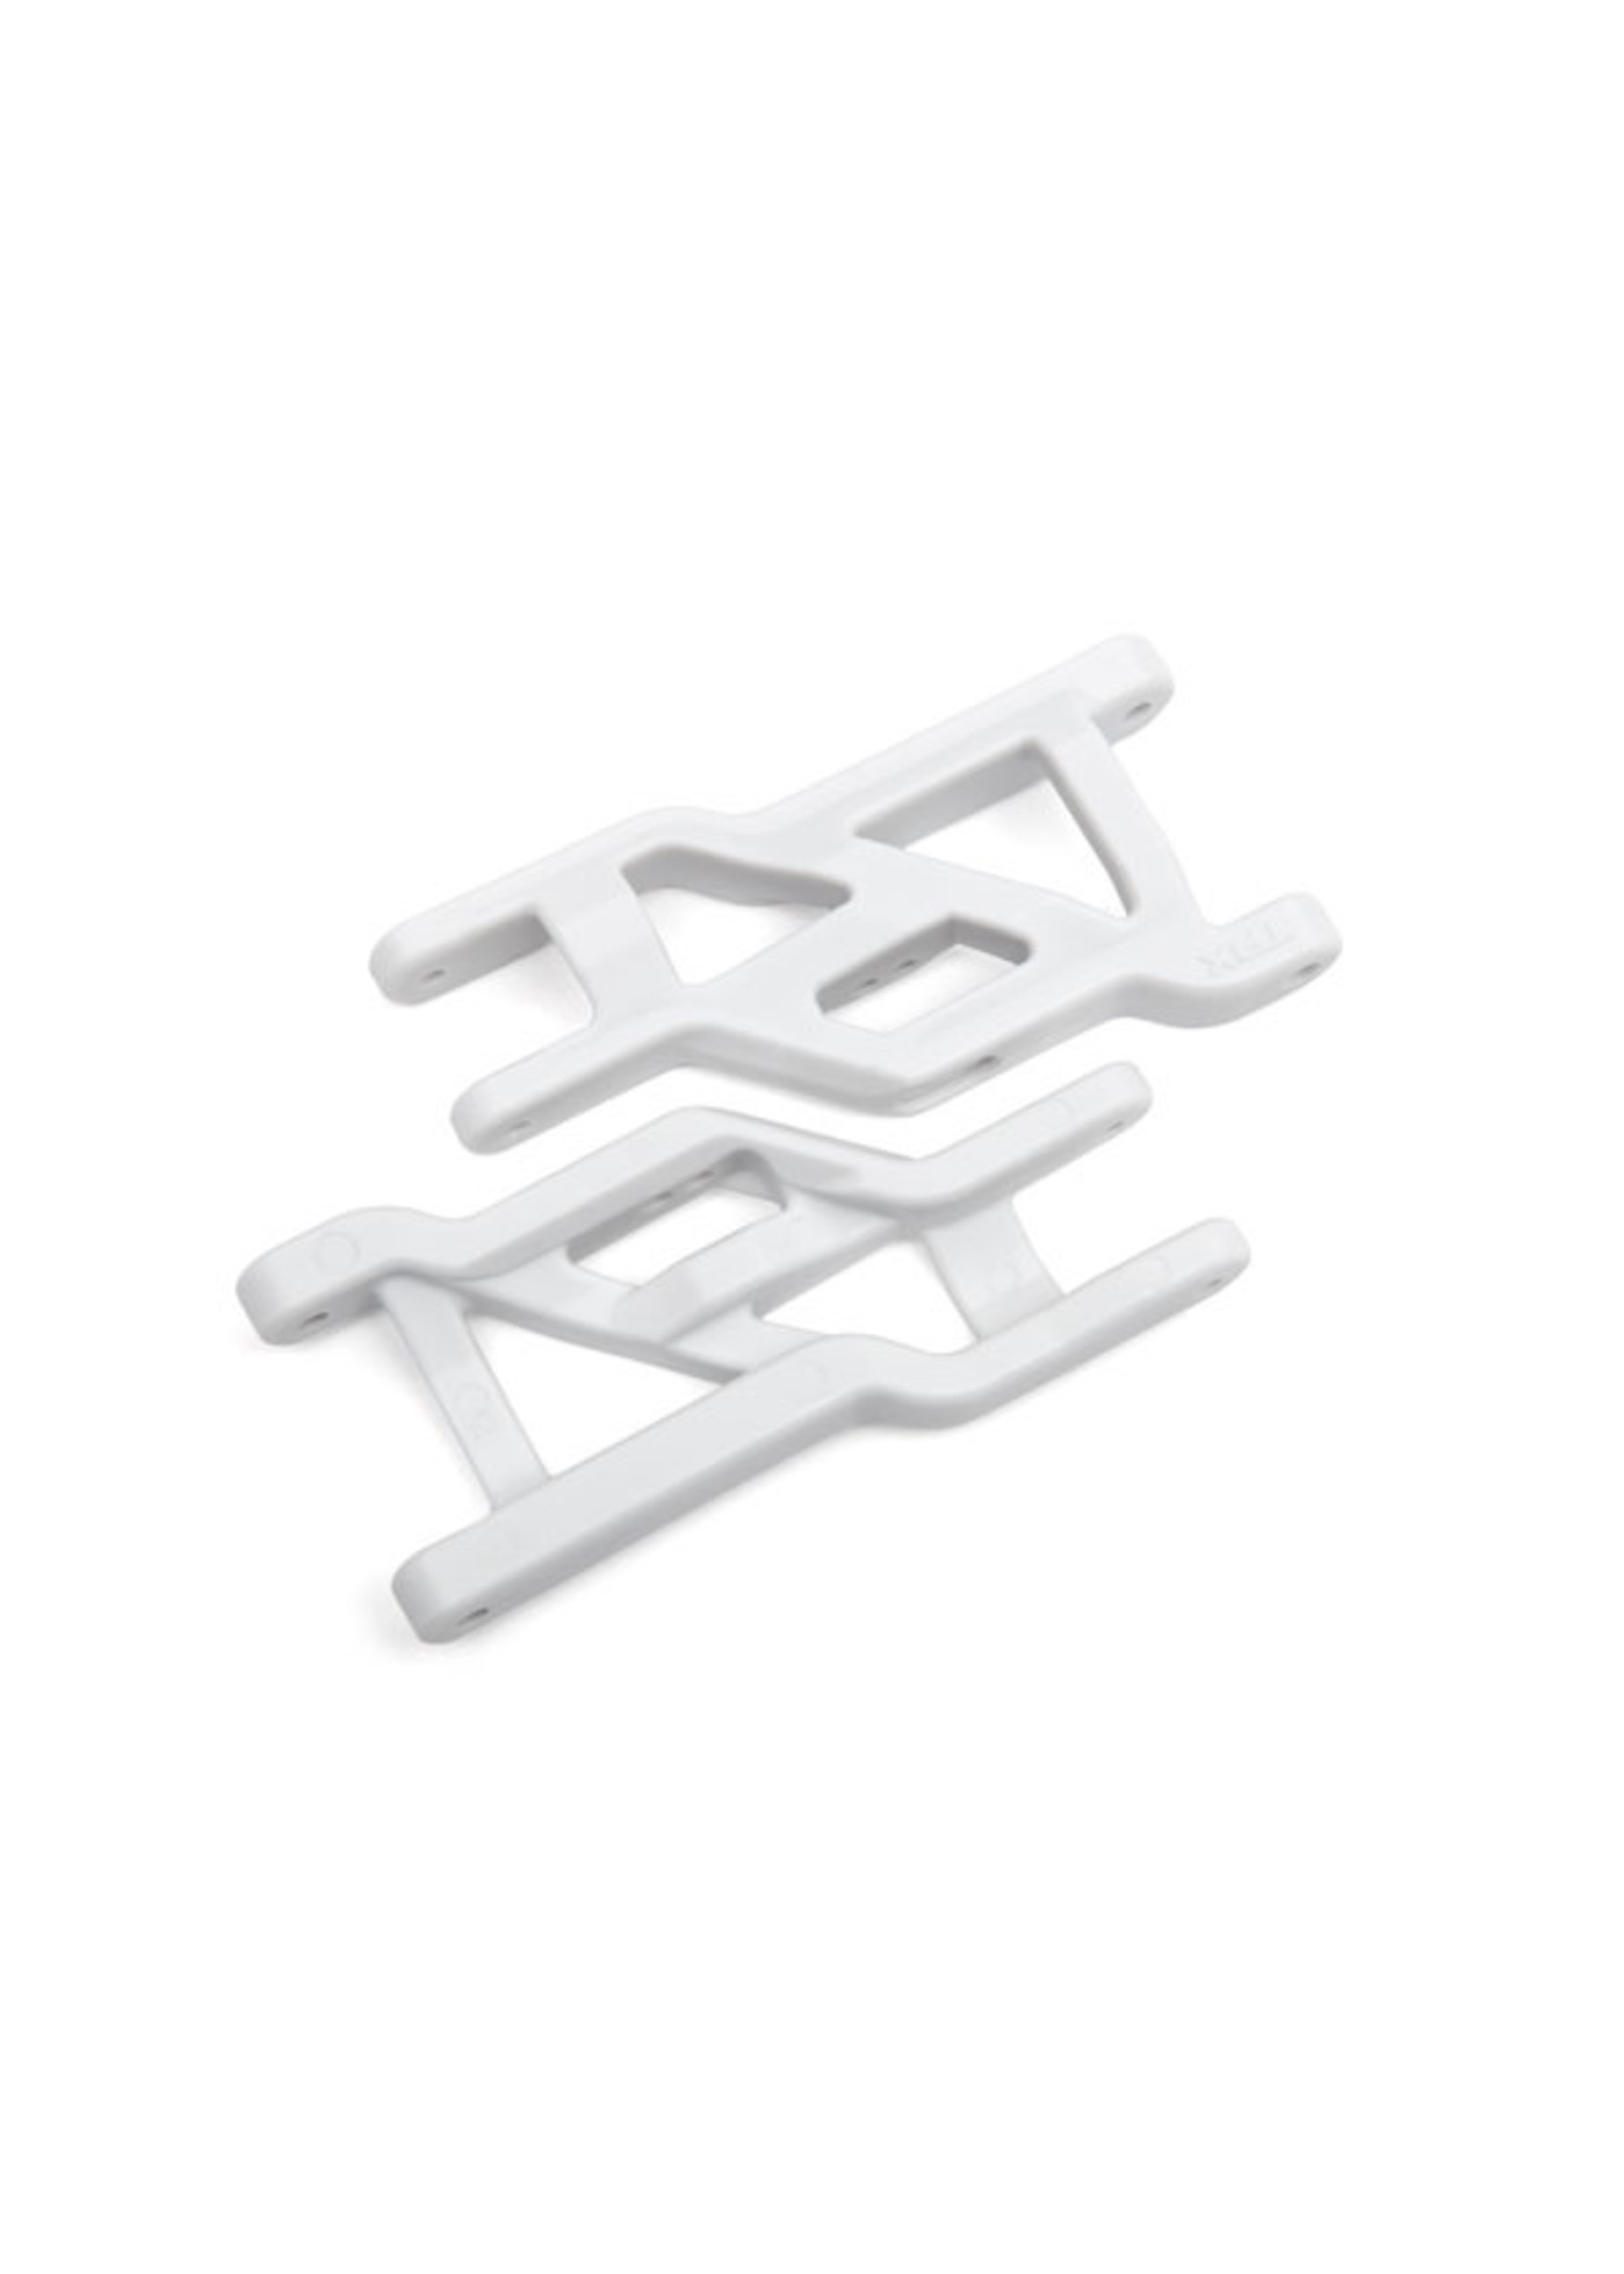 Traxxas 3631L - Heavy Duty Front Suspension Arms - White